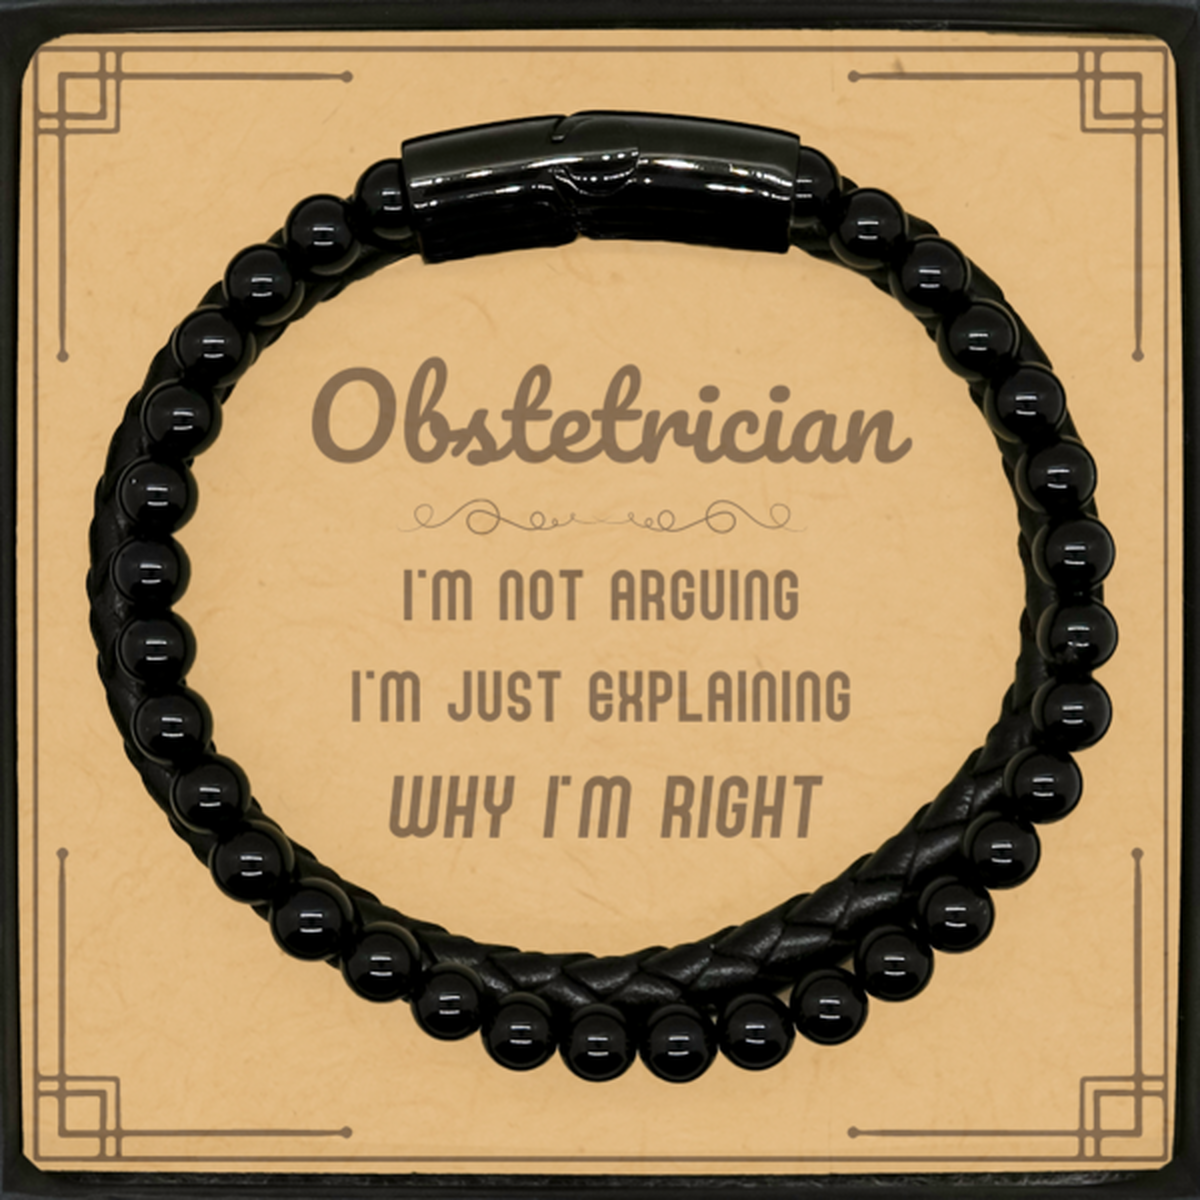 Obstetrician I'm not Arguing. I'm Just Explaining Why I'm RIGHT Stone Leather Bracelets, Funny Saying Quote Obstetrician Gifts For Obstetrician Message Card Graduation Birthday Christmas Gifts for Men Women Coworker